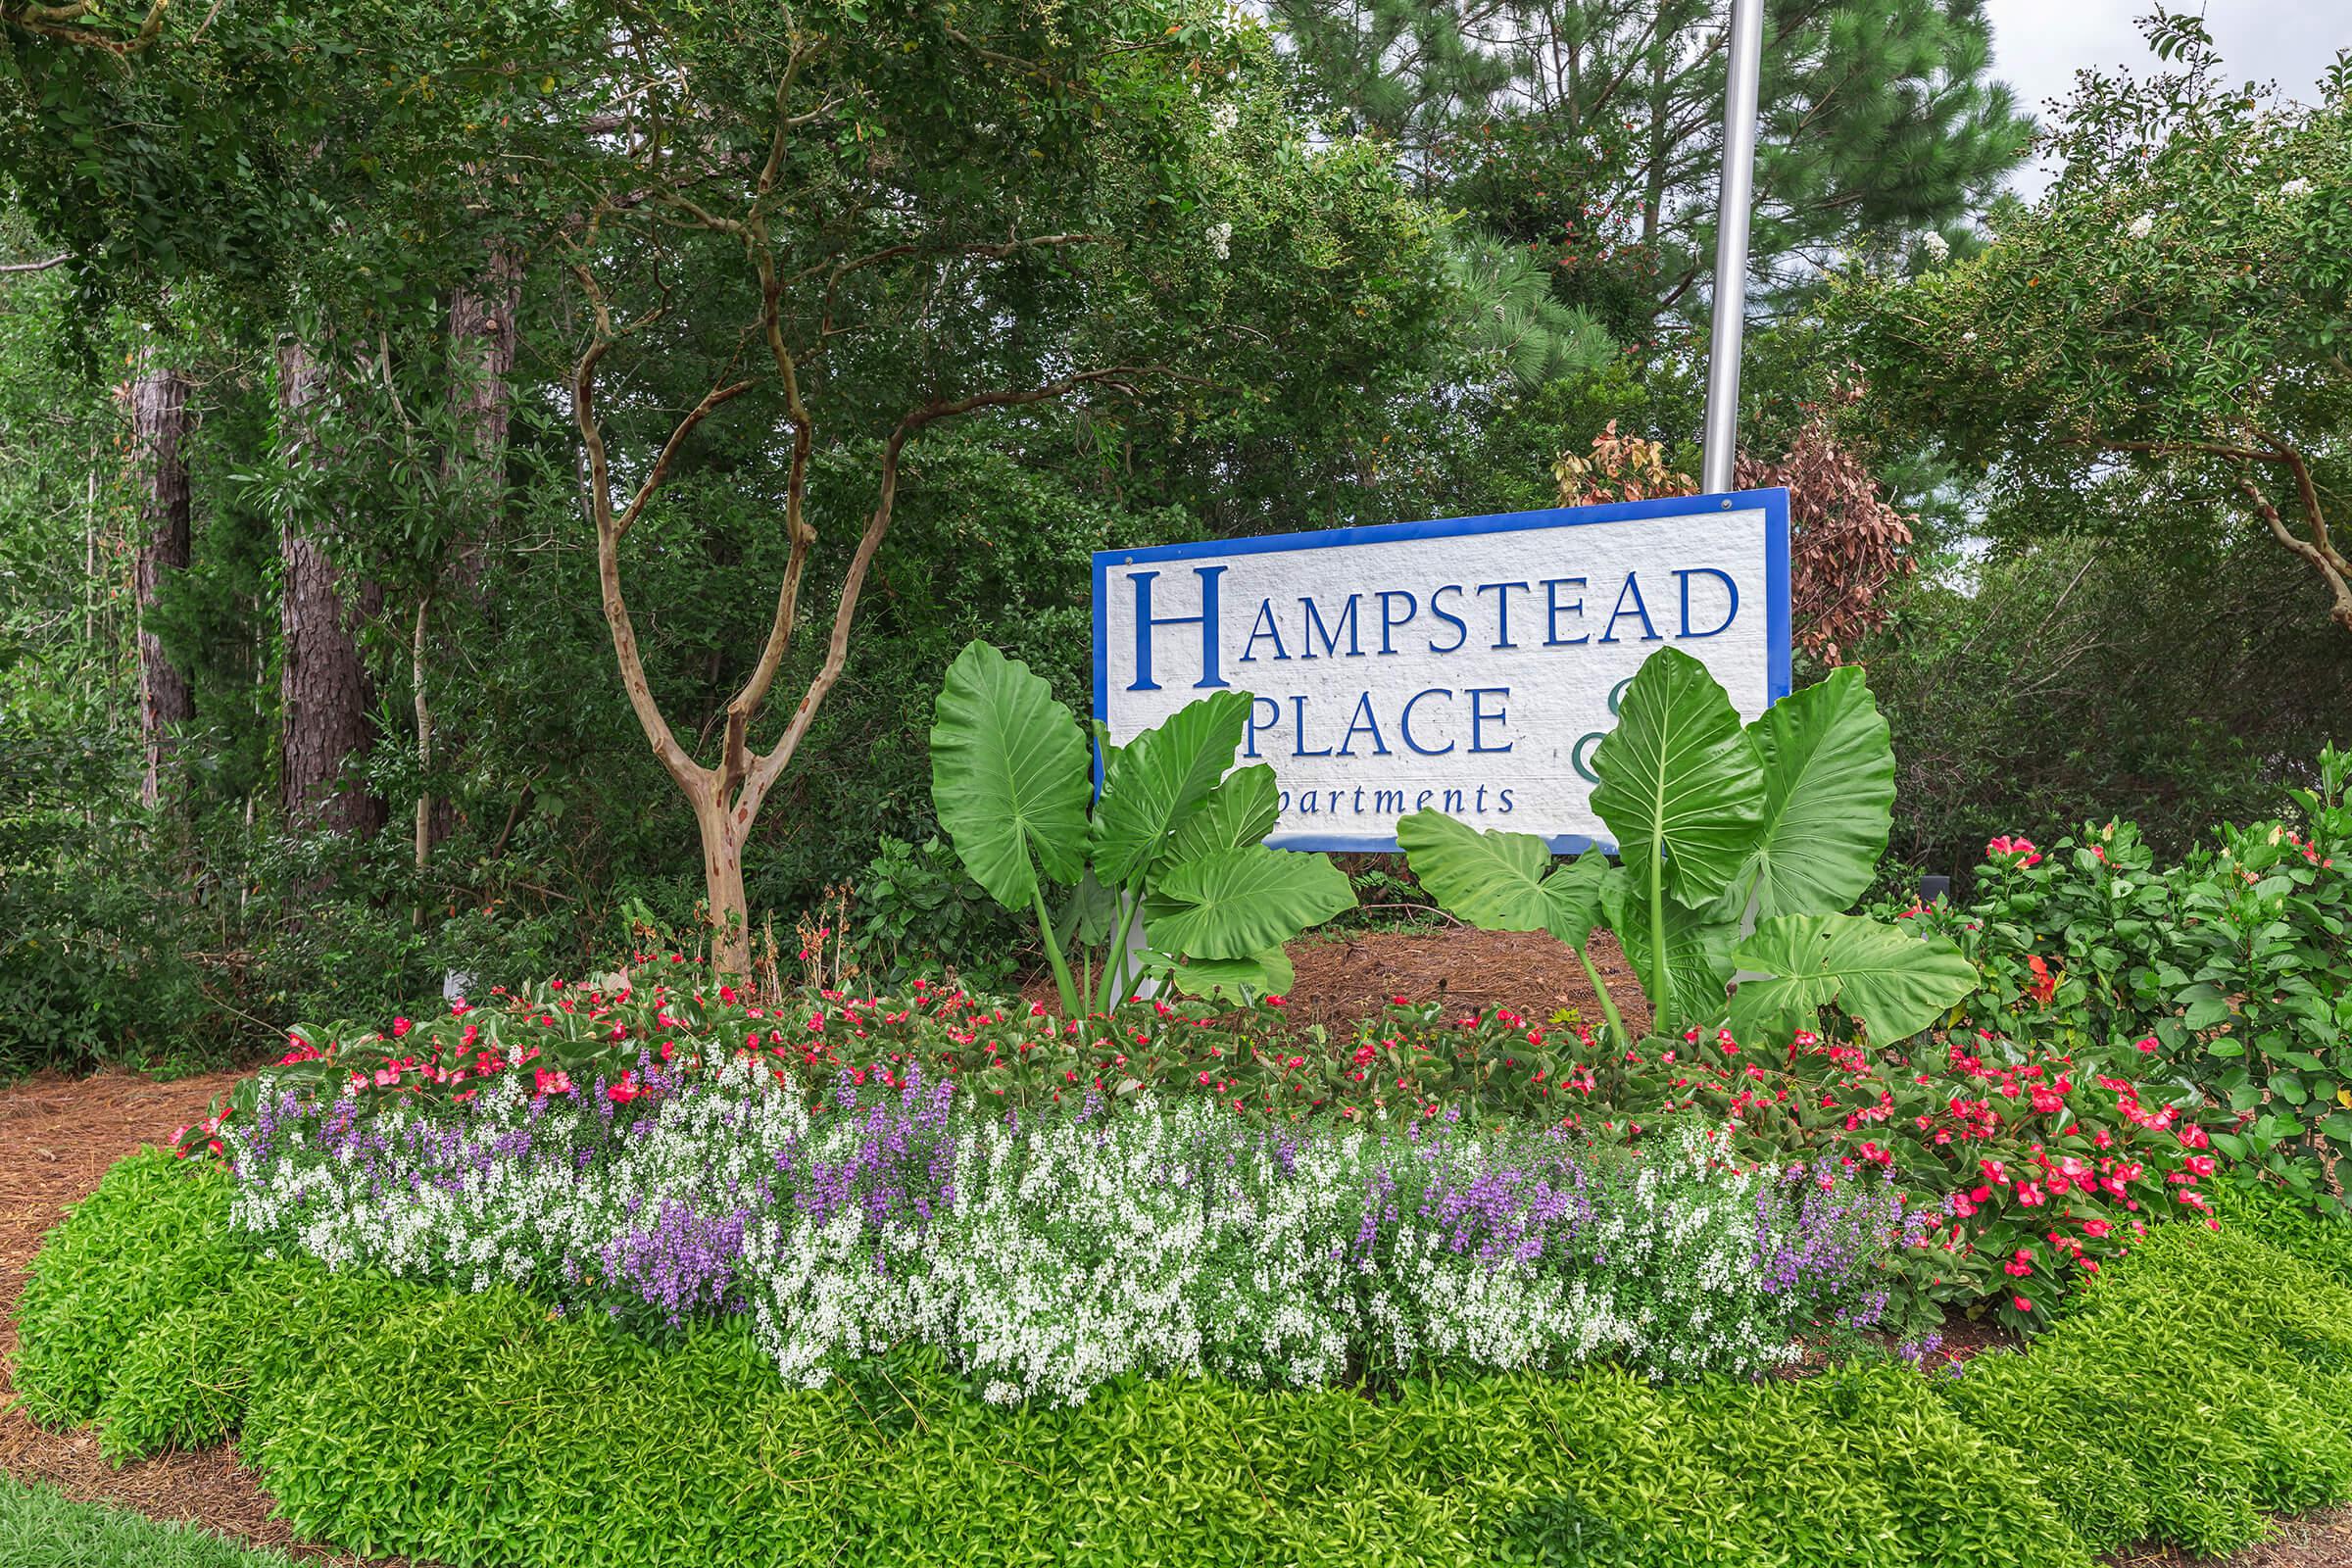 Come Visit The Hampstead Place In Hampstead, NC